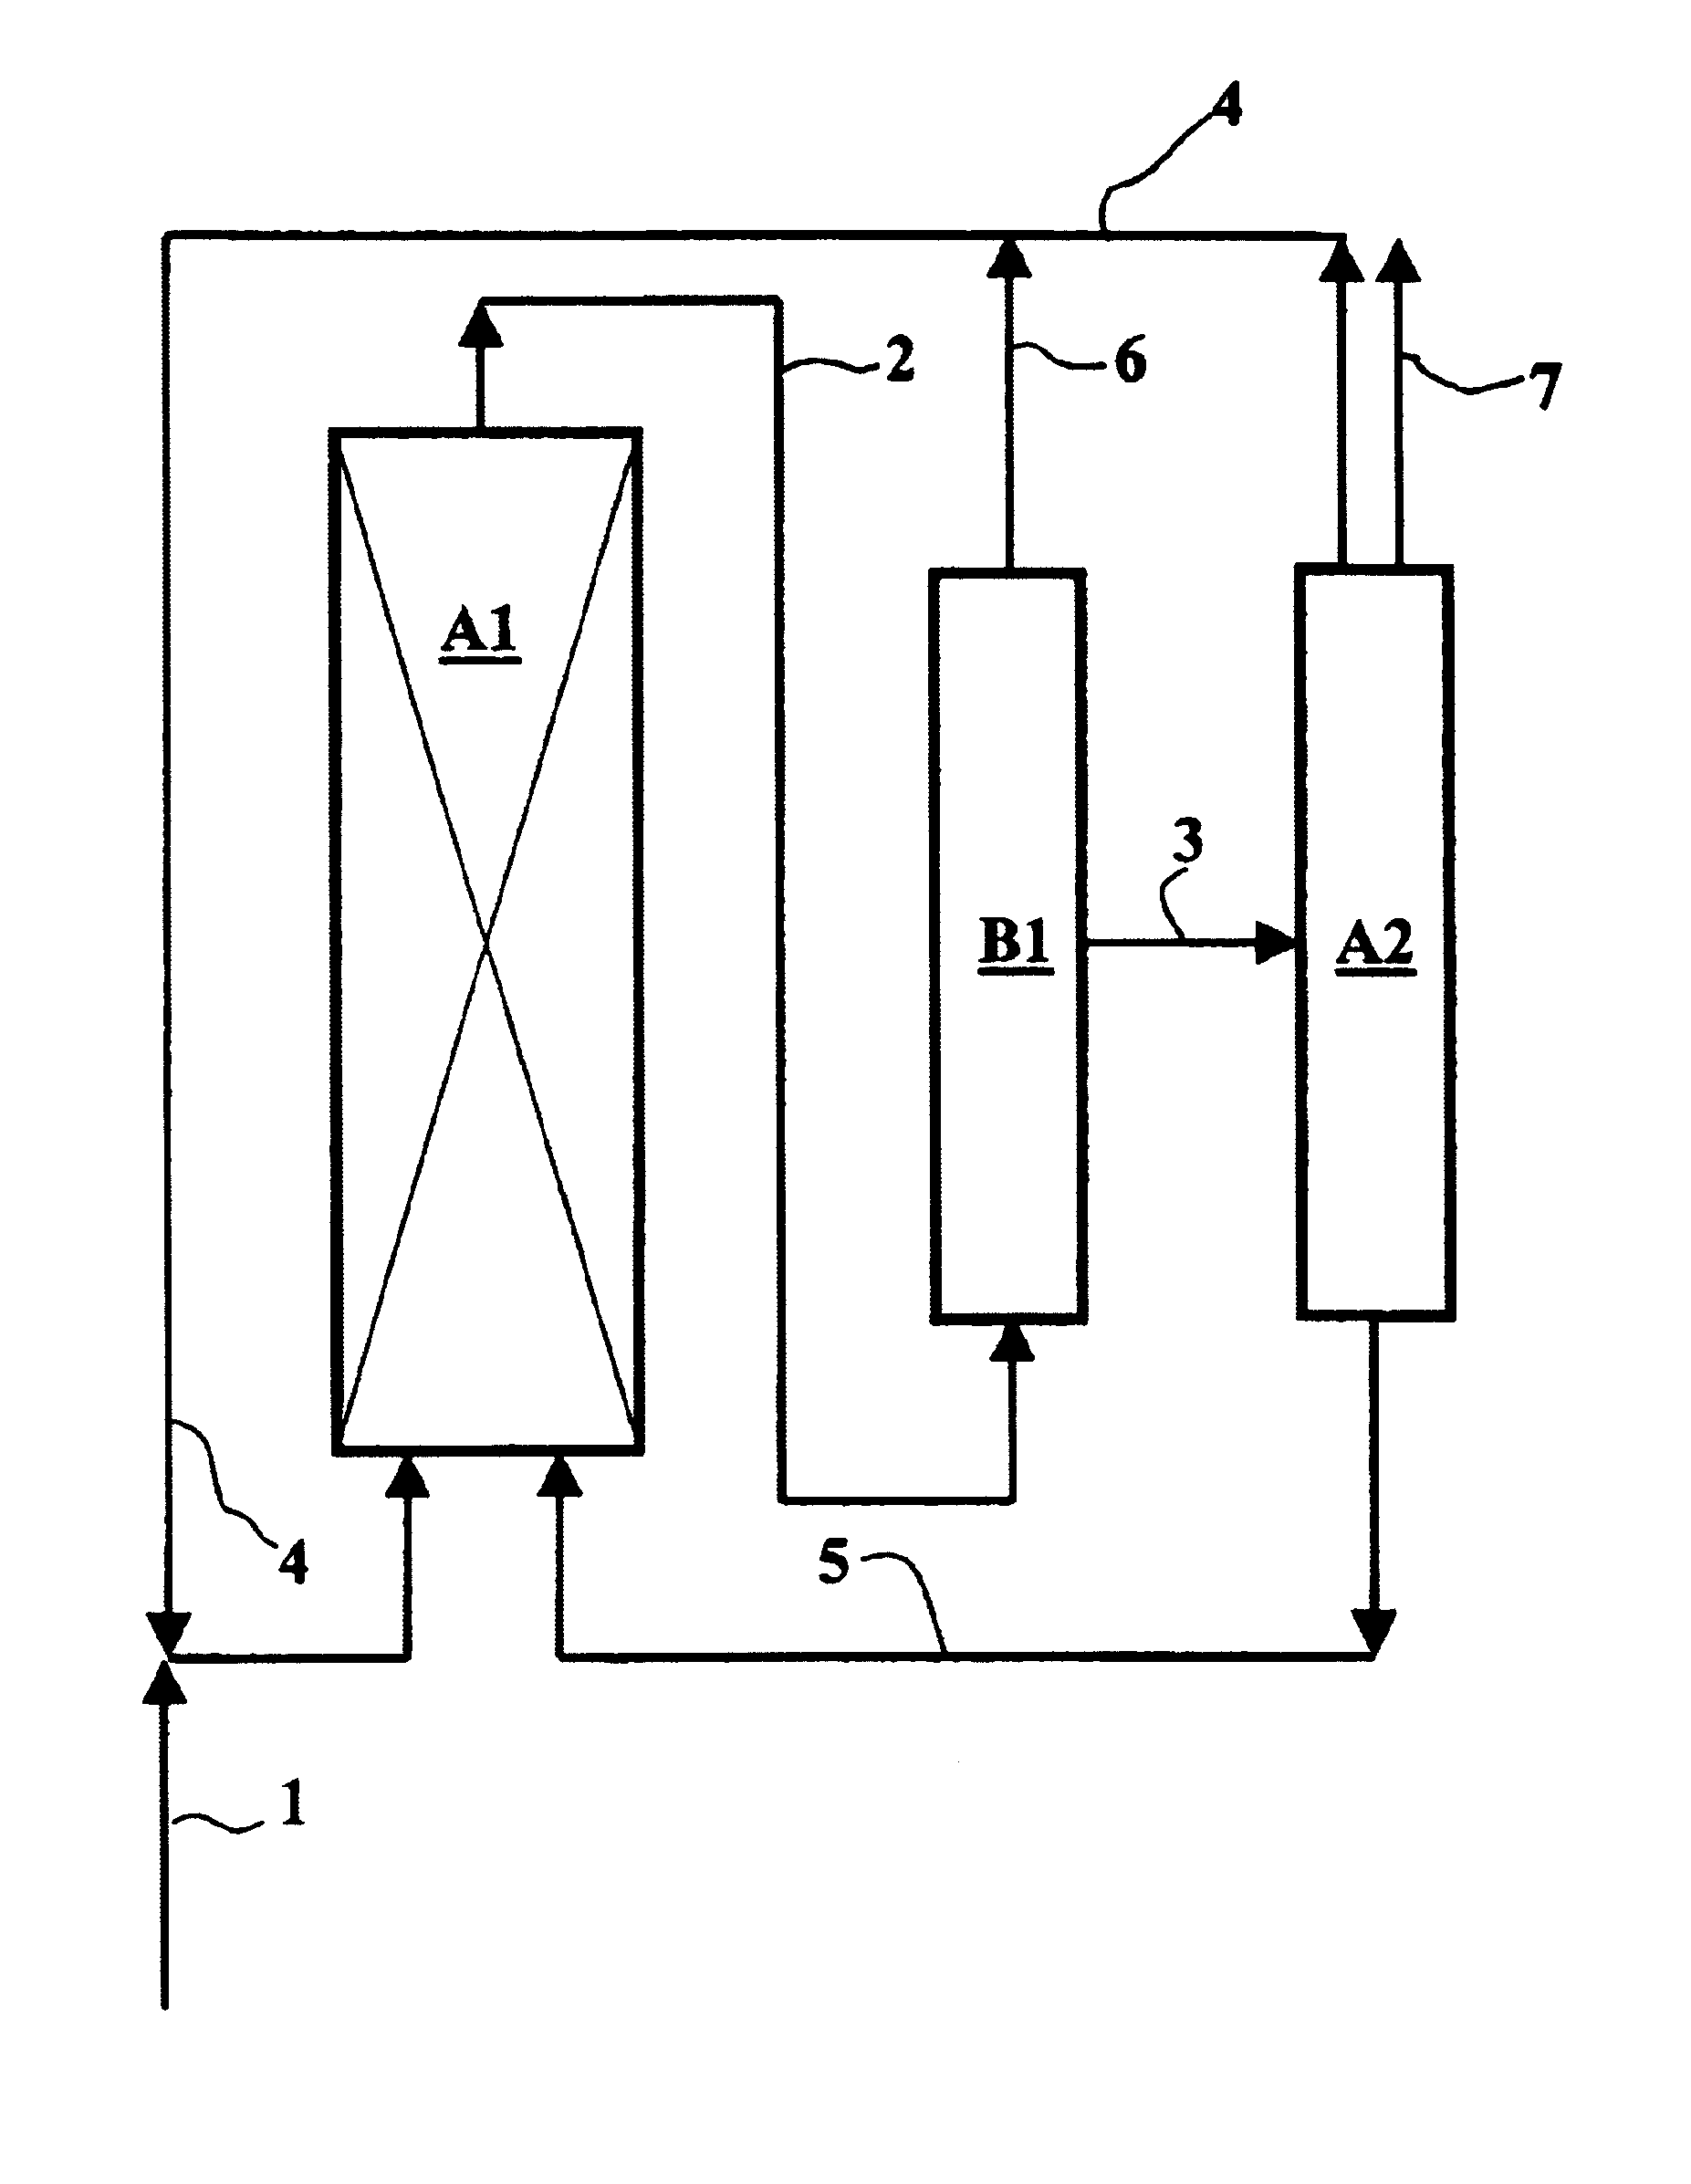 Process for carbonylating alcohols, employing a catalyst based on rhodium or iridium in a non-aqueous ionic liquid, with efficient catalyst recycling